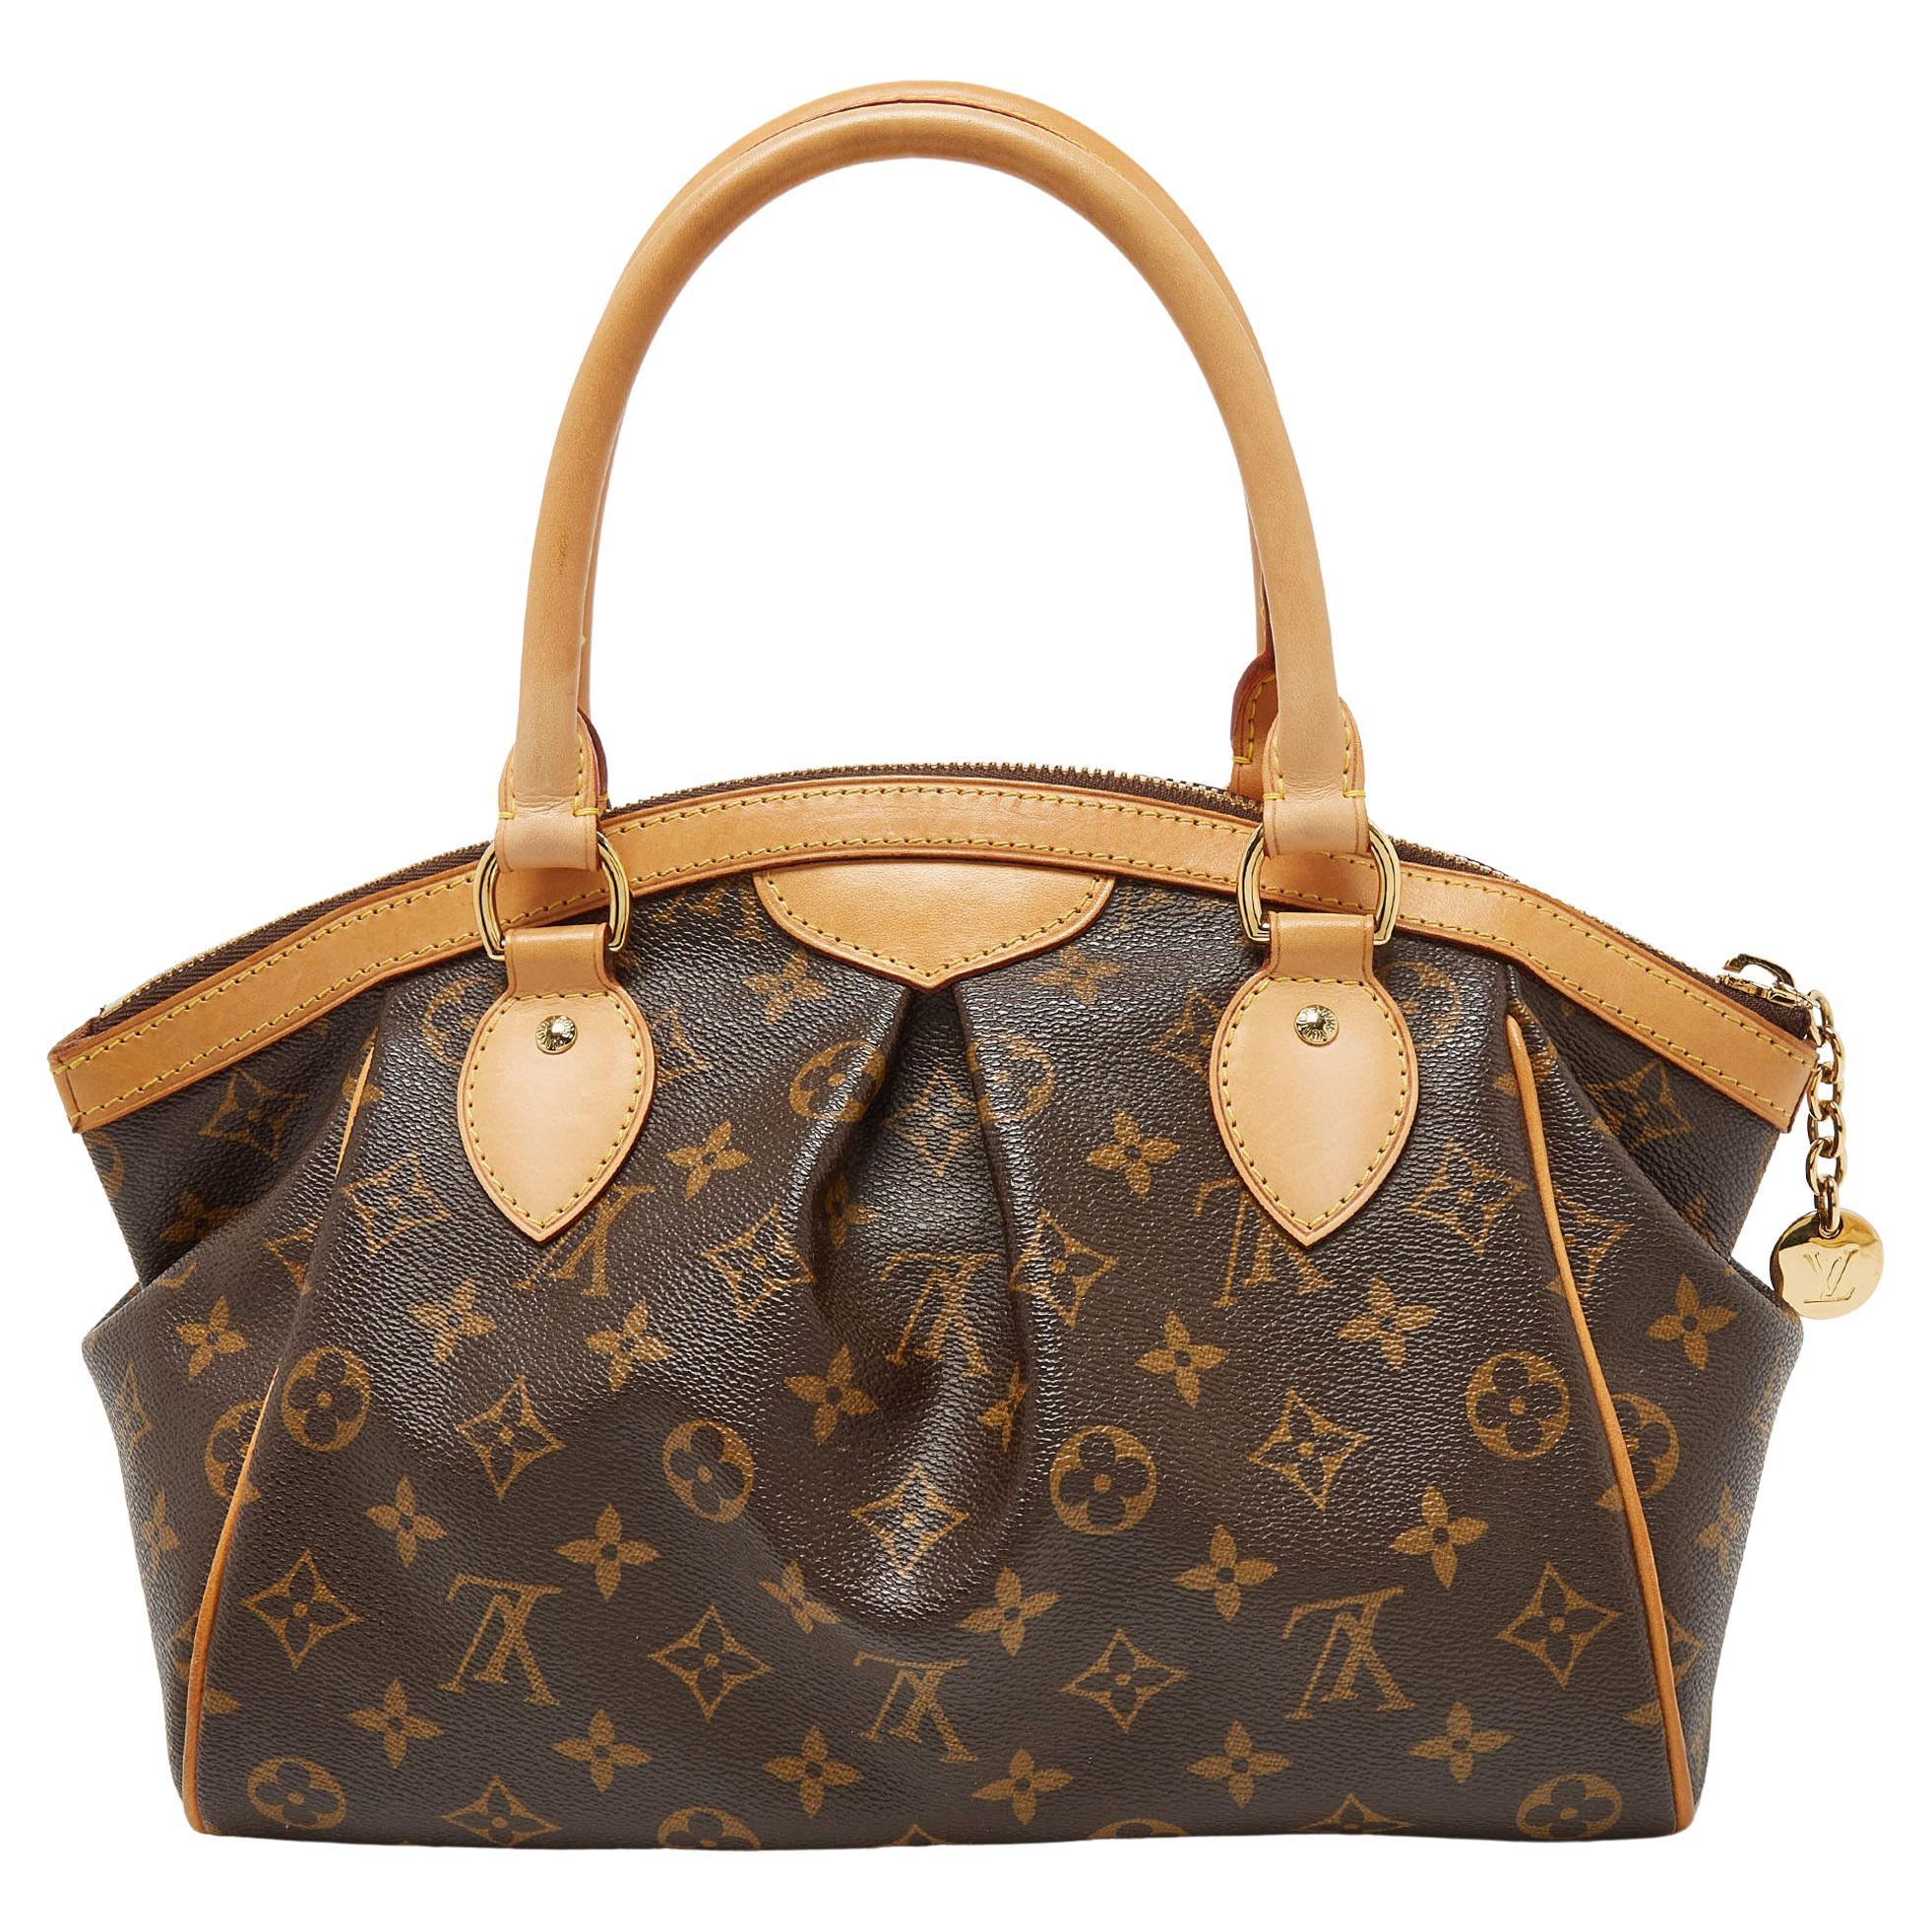 Elevate your style with this LV Monogram bag. Merging form and function, this exquisite accessory epitomizes sophistication, ensuring you stand out with elegance and practicality by your side

